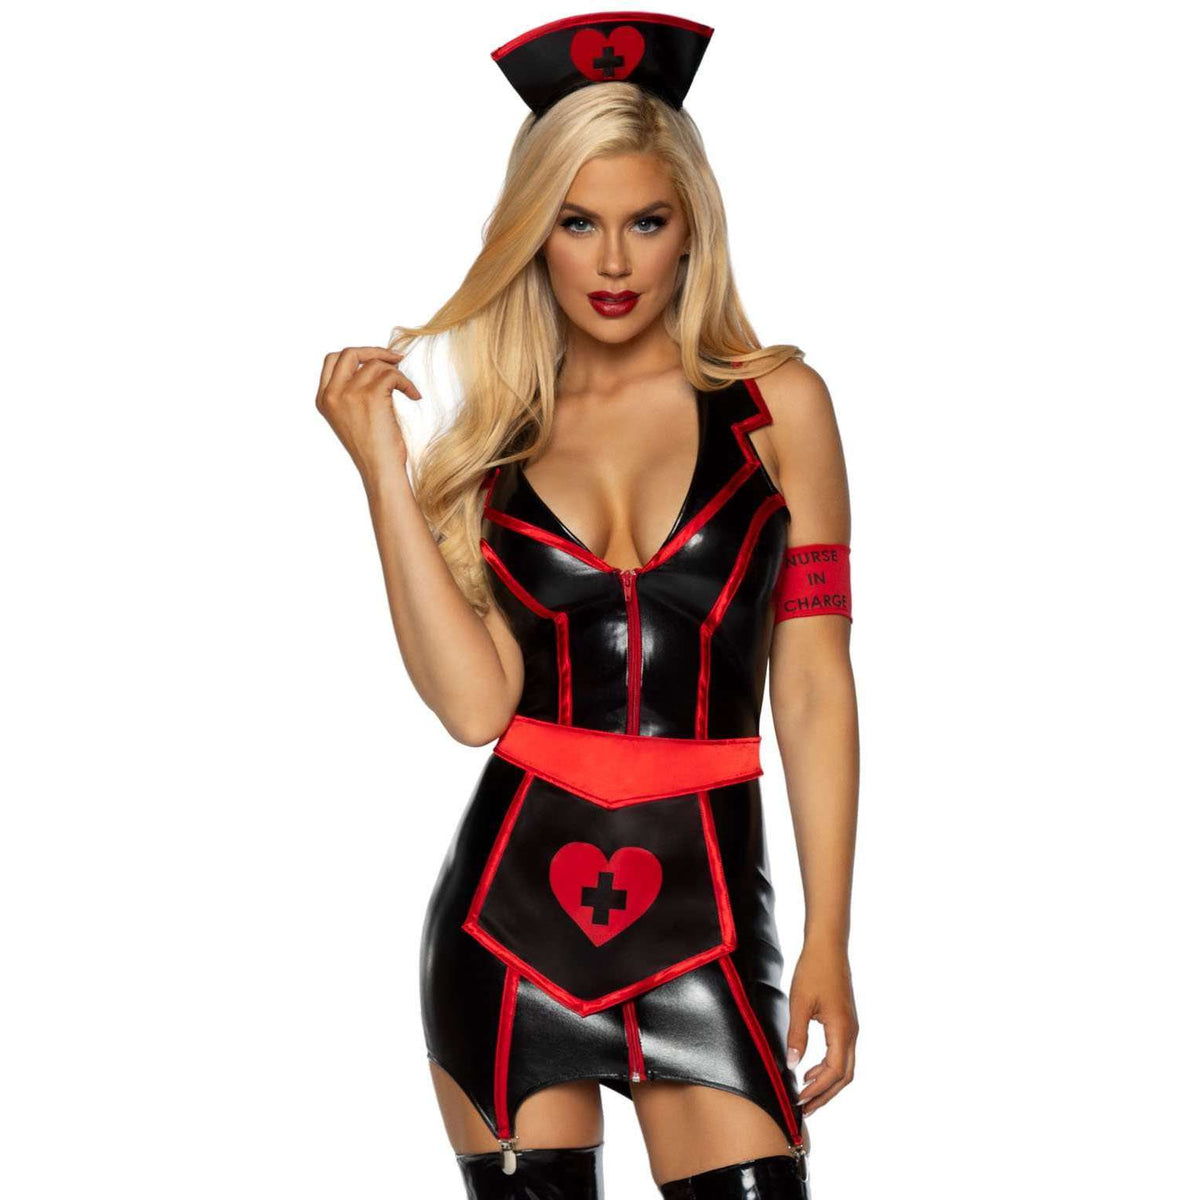 Black w/ Red Accents Sexy Naughty Nurse Adult Costume